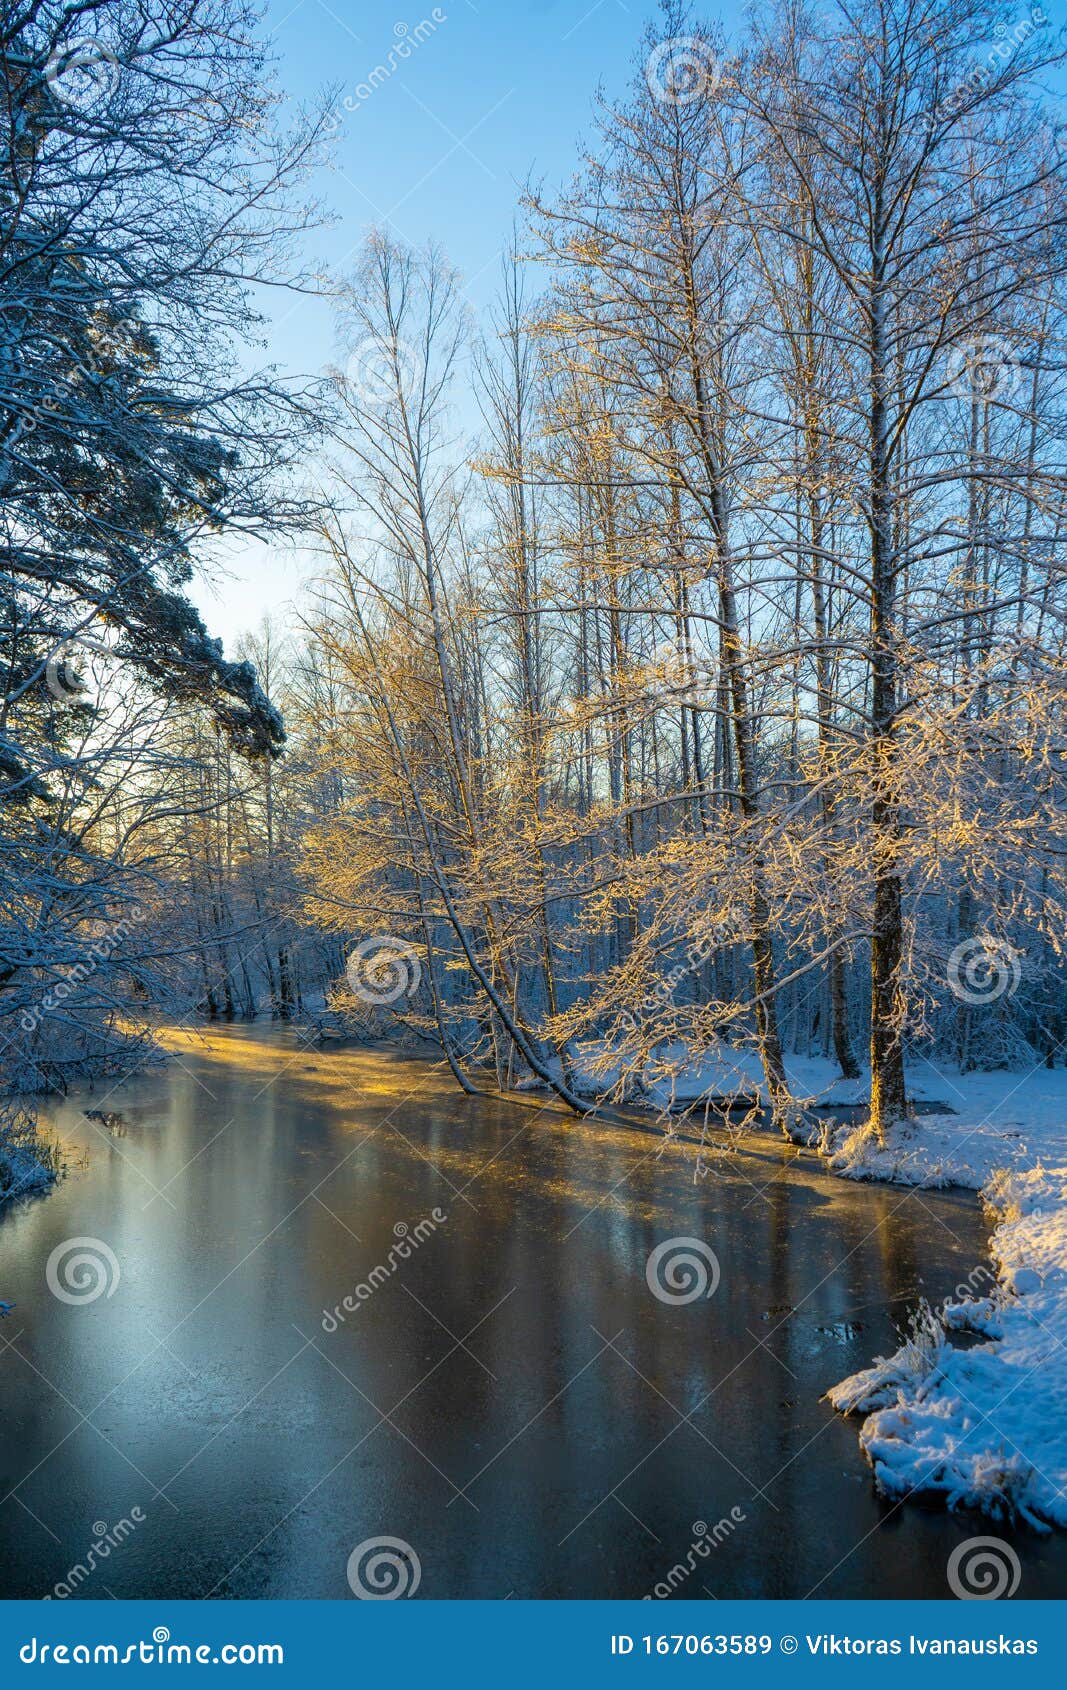 Frozen Canal and Trees with Snow. Winter in Scandinavia. Swedish Wallpaper. Nature Stock Image - Image of covered, river: 167063589